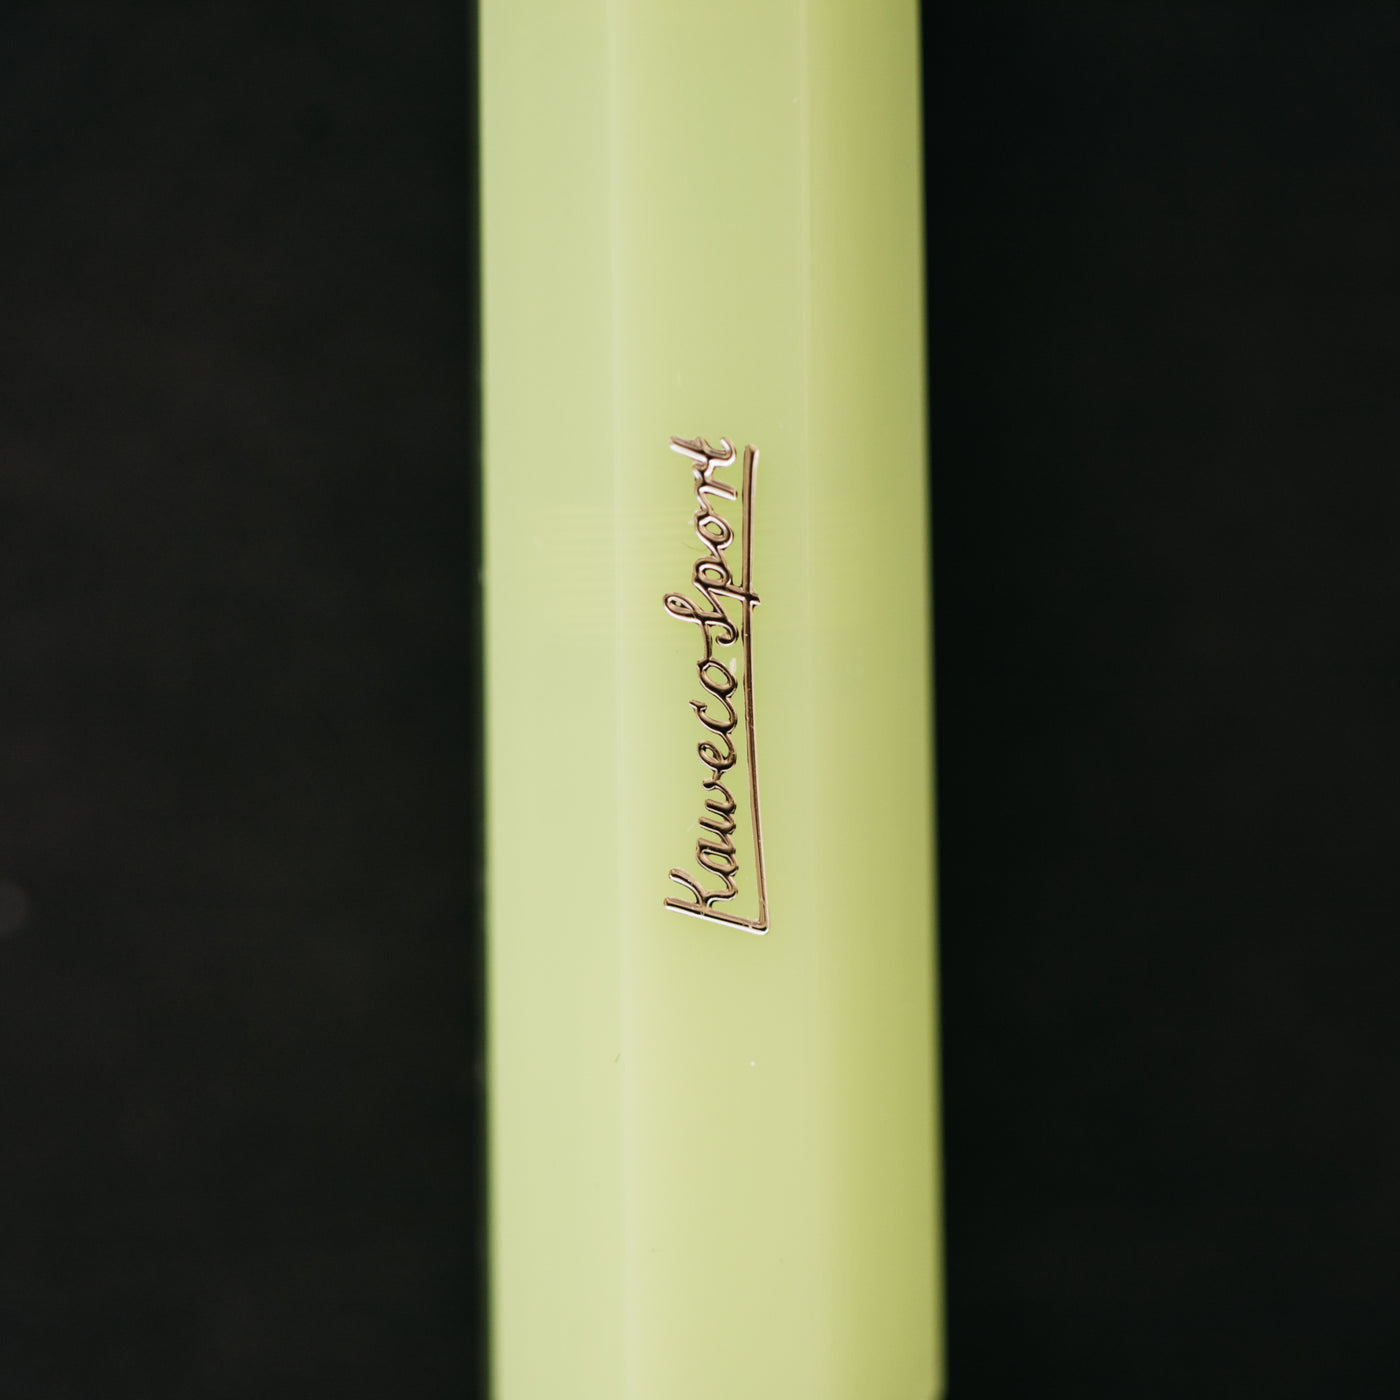 Kaweco Frosted Sport Lime Fountain Pen